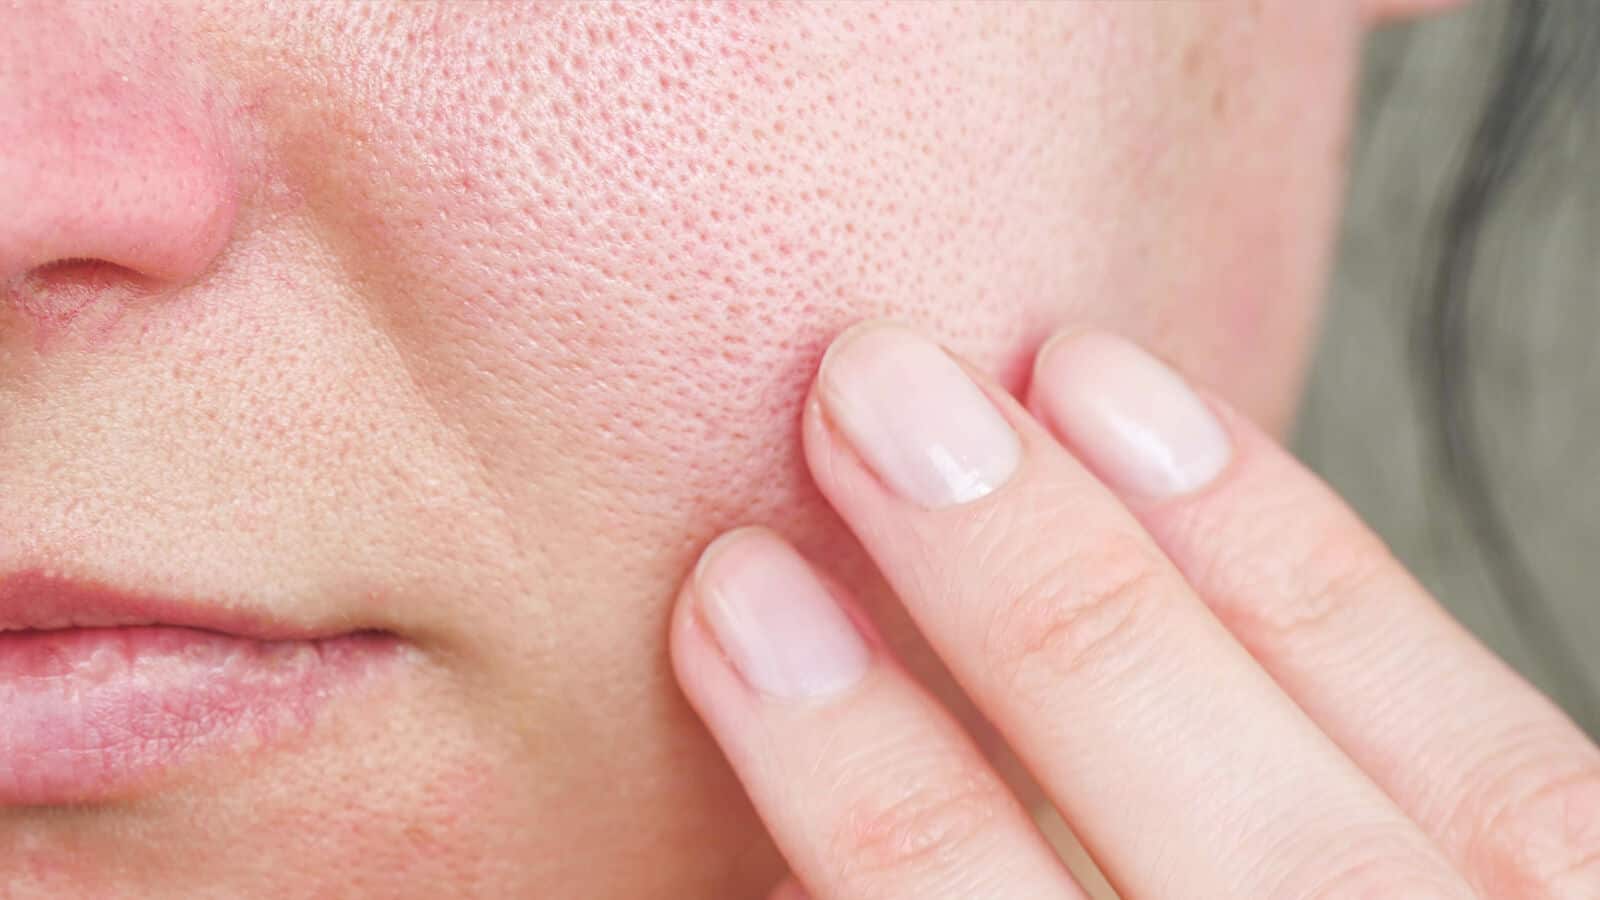 Dermatologists Reveal 10 Ways to Reduce Large Pores 1600x900 1